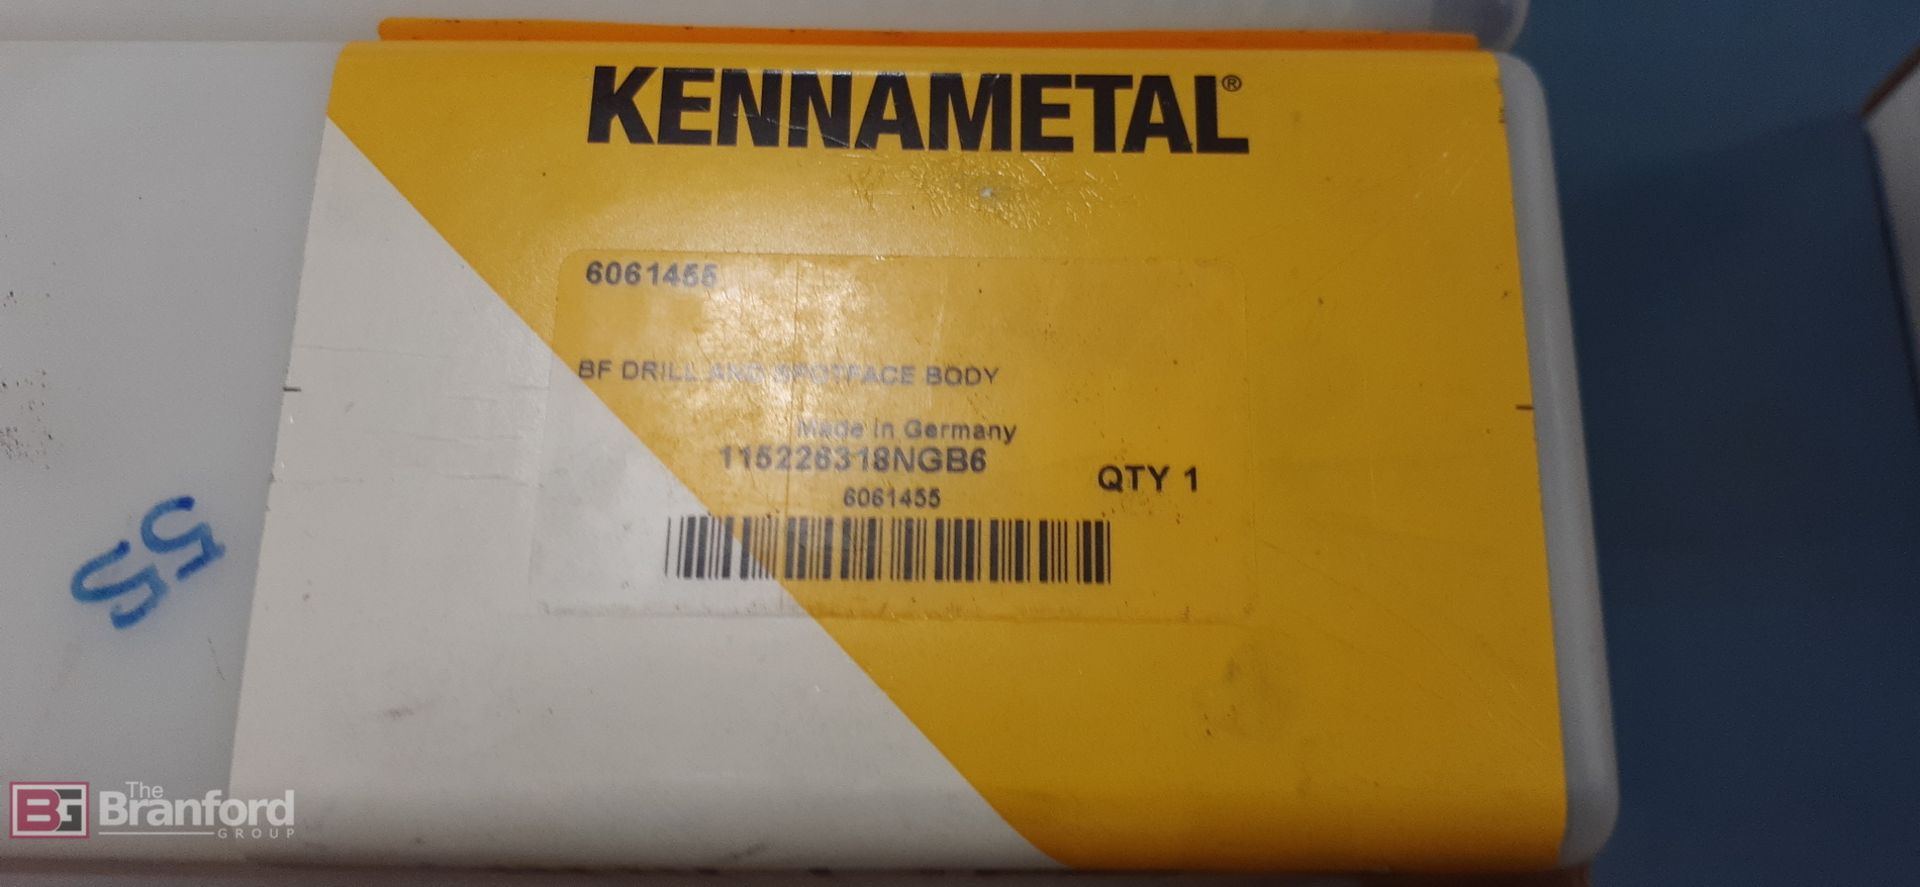 (5) Kennametal 115226318NGB6, BF Drill & Spotface Body - Image 2 of 3